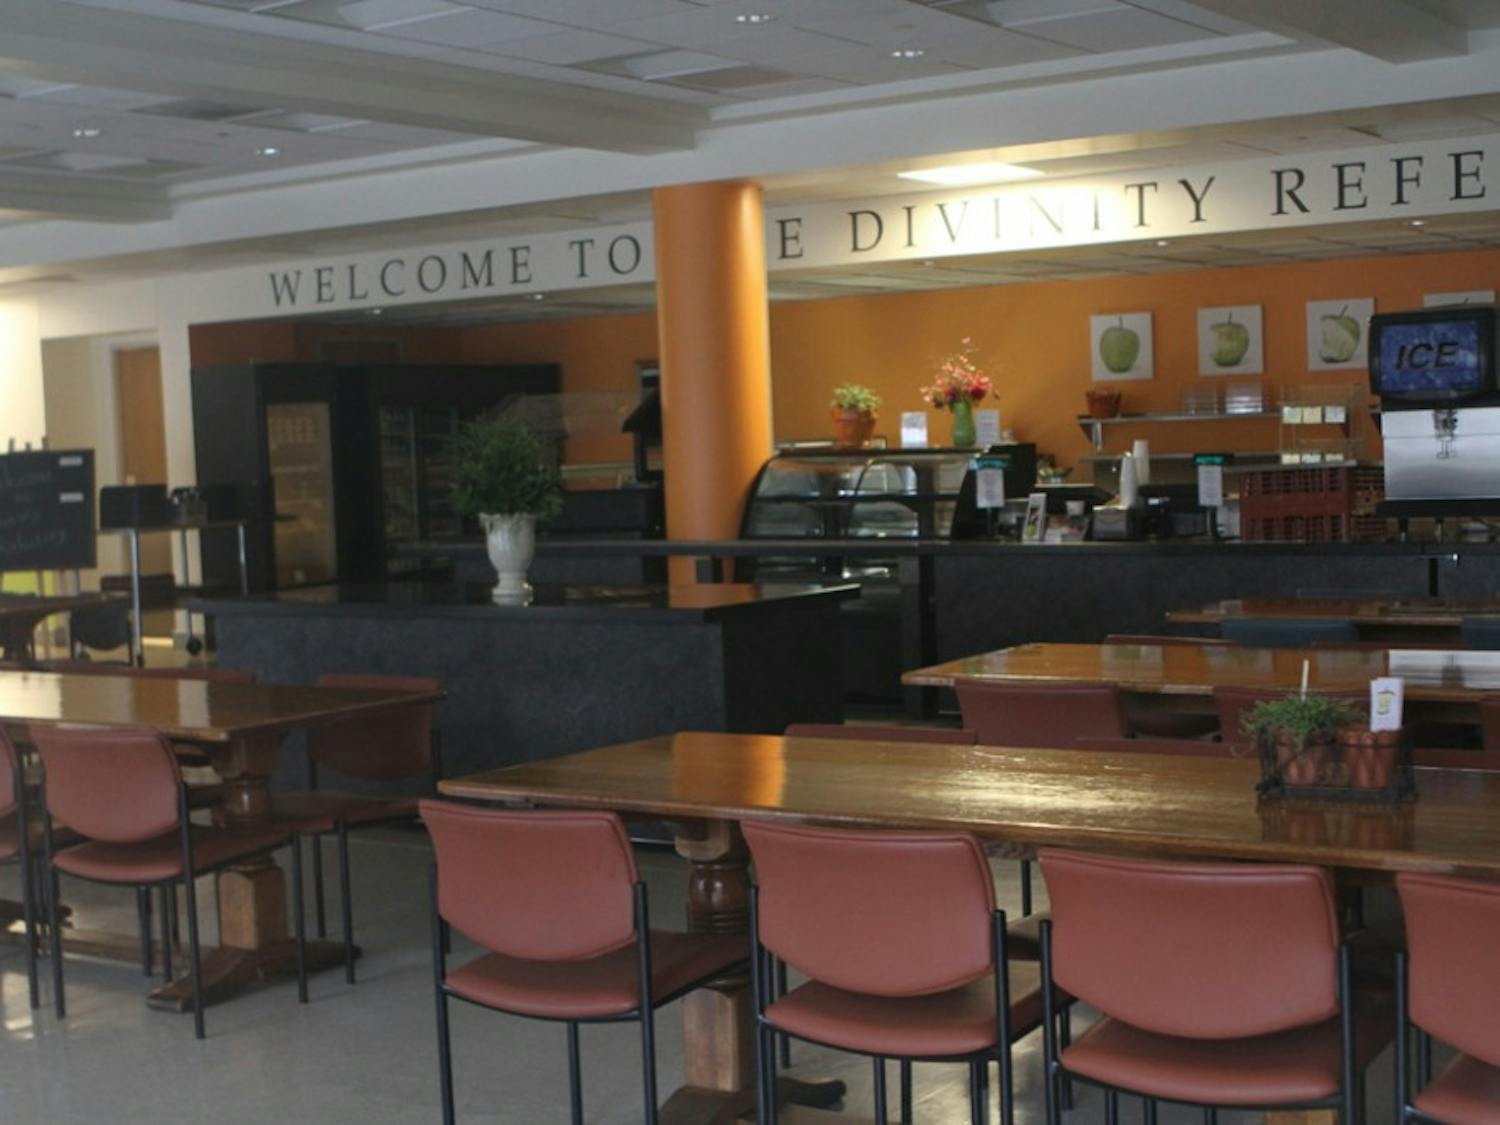 The Divinity School Refectory, now operated under Core Catering, hopes to maintain the popularity of the former restaurant.